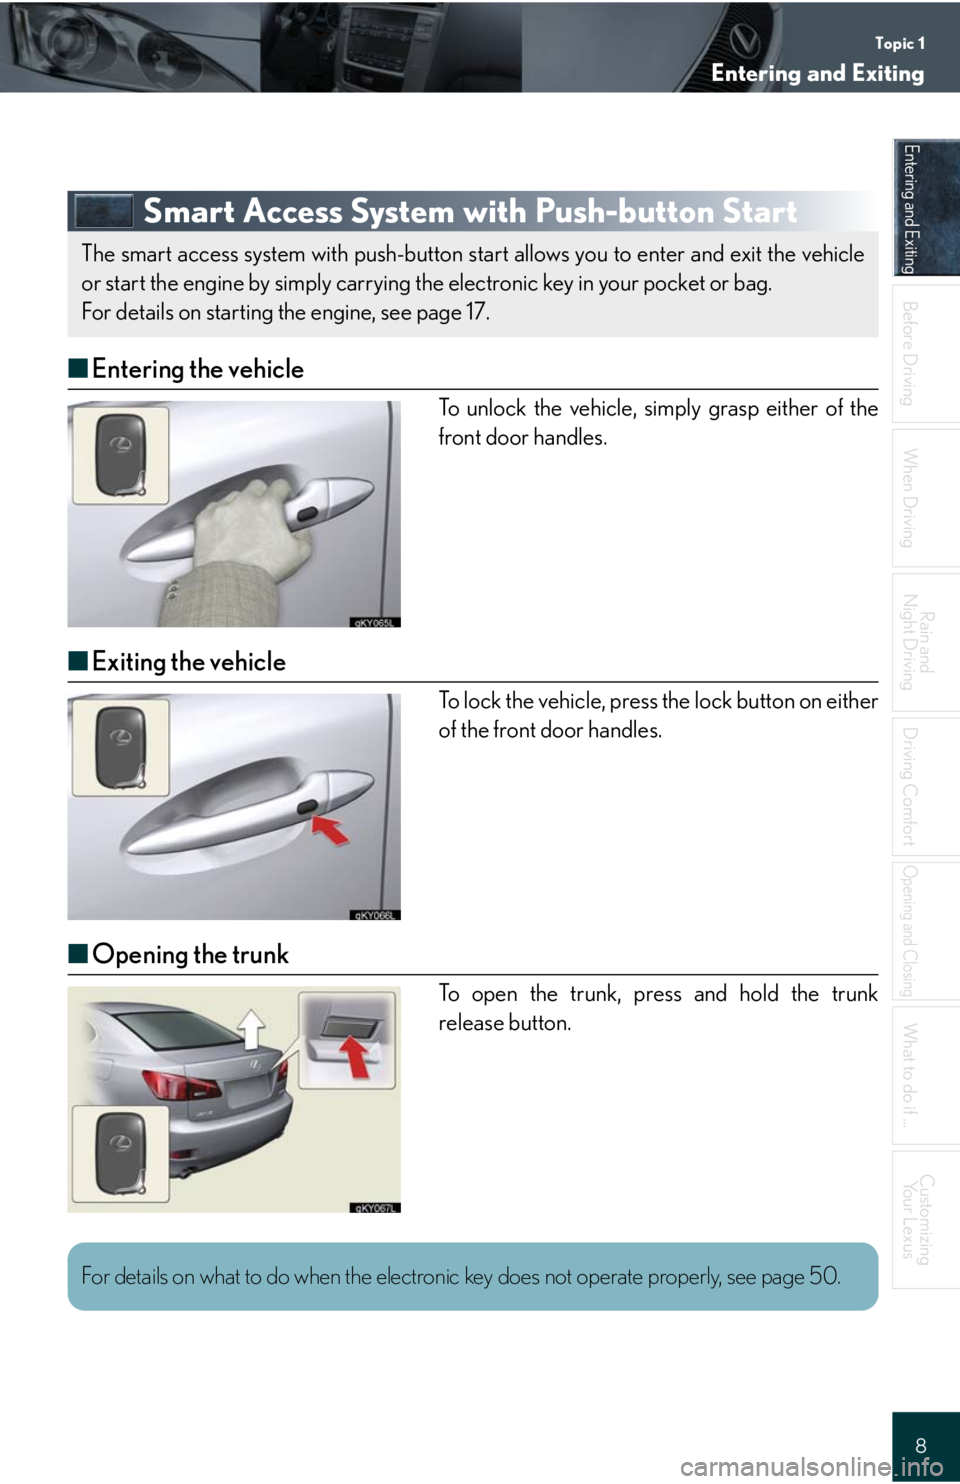 Lexus IS250 2008  Lexus Parking Assist-sensor / LEXUS 2008 IS 350/250 QUICK GUIDE OWNERS MANUAL (OM60D81U) Topic 1
Entering and Exiting
8
Entering and Exiting
When Driving
Rain and 
Night Driving
Driving Comfort
Opening and Closing
What to do if ...
Customizing
Yo u r  L e x u s
Before DrivingBefore Drivin